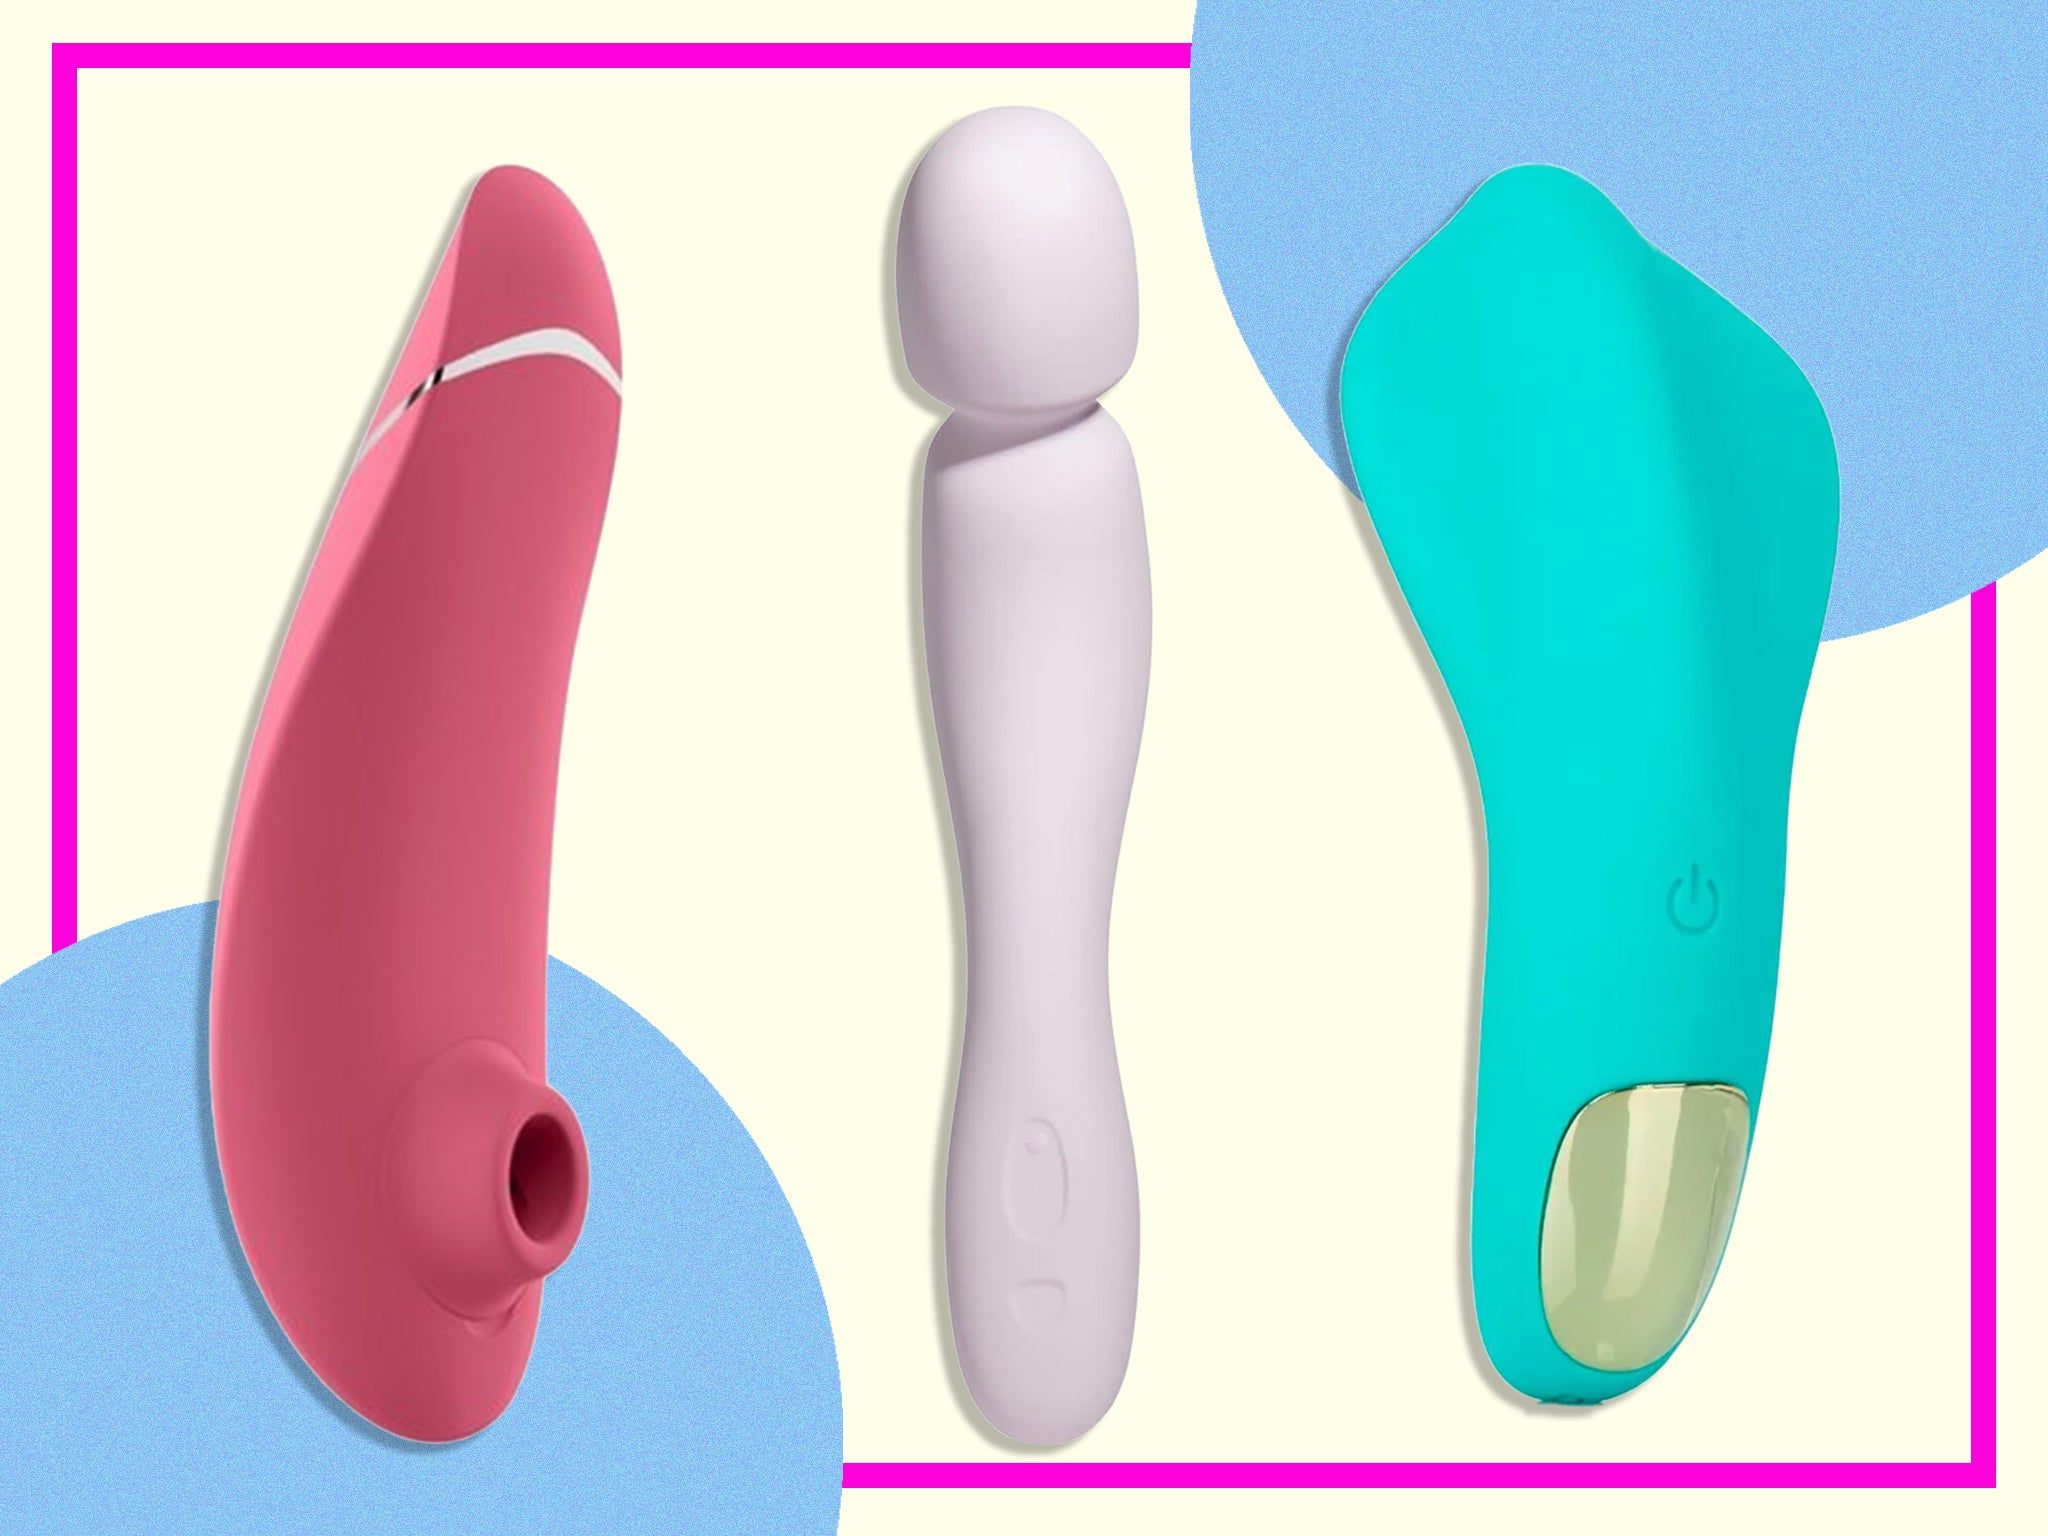 Best clit vibrators 2022 Magic wands, bullets, suction toys and more The Independent photo